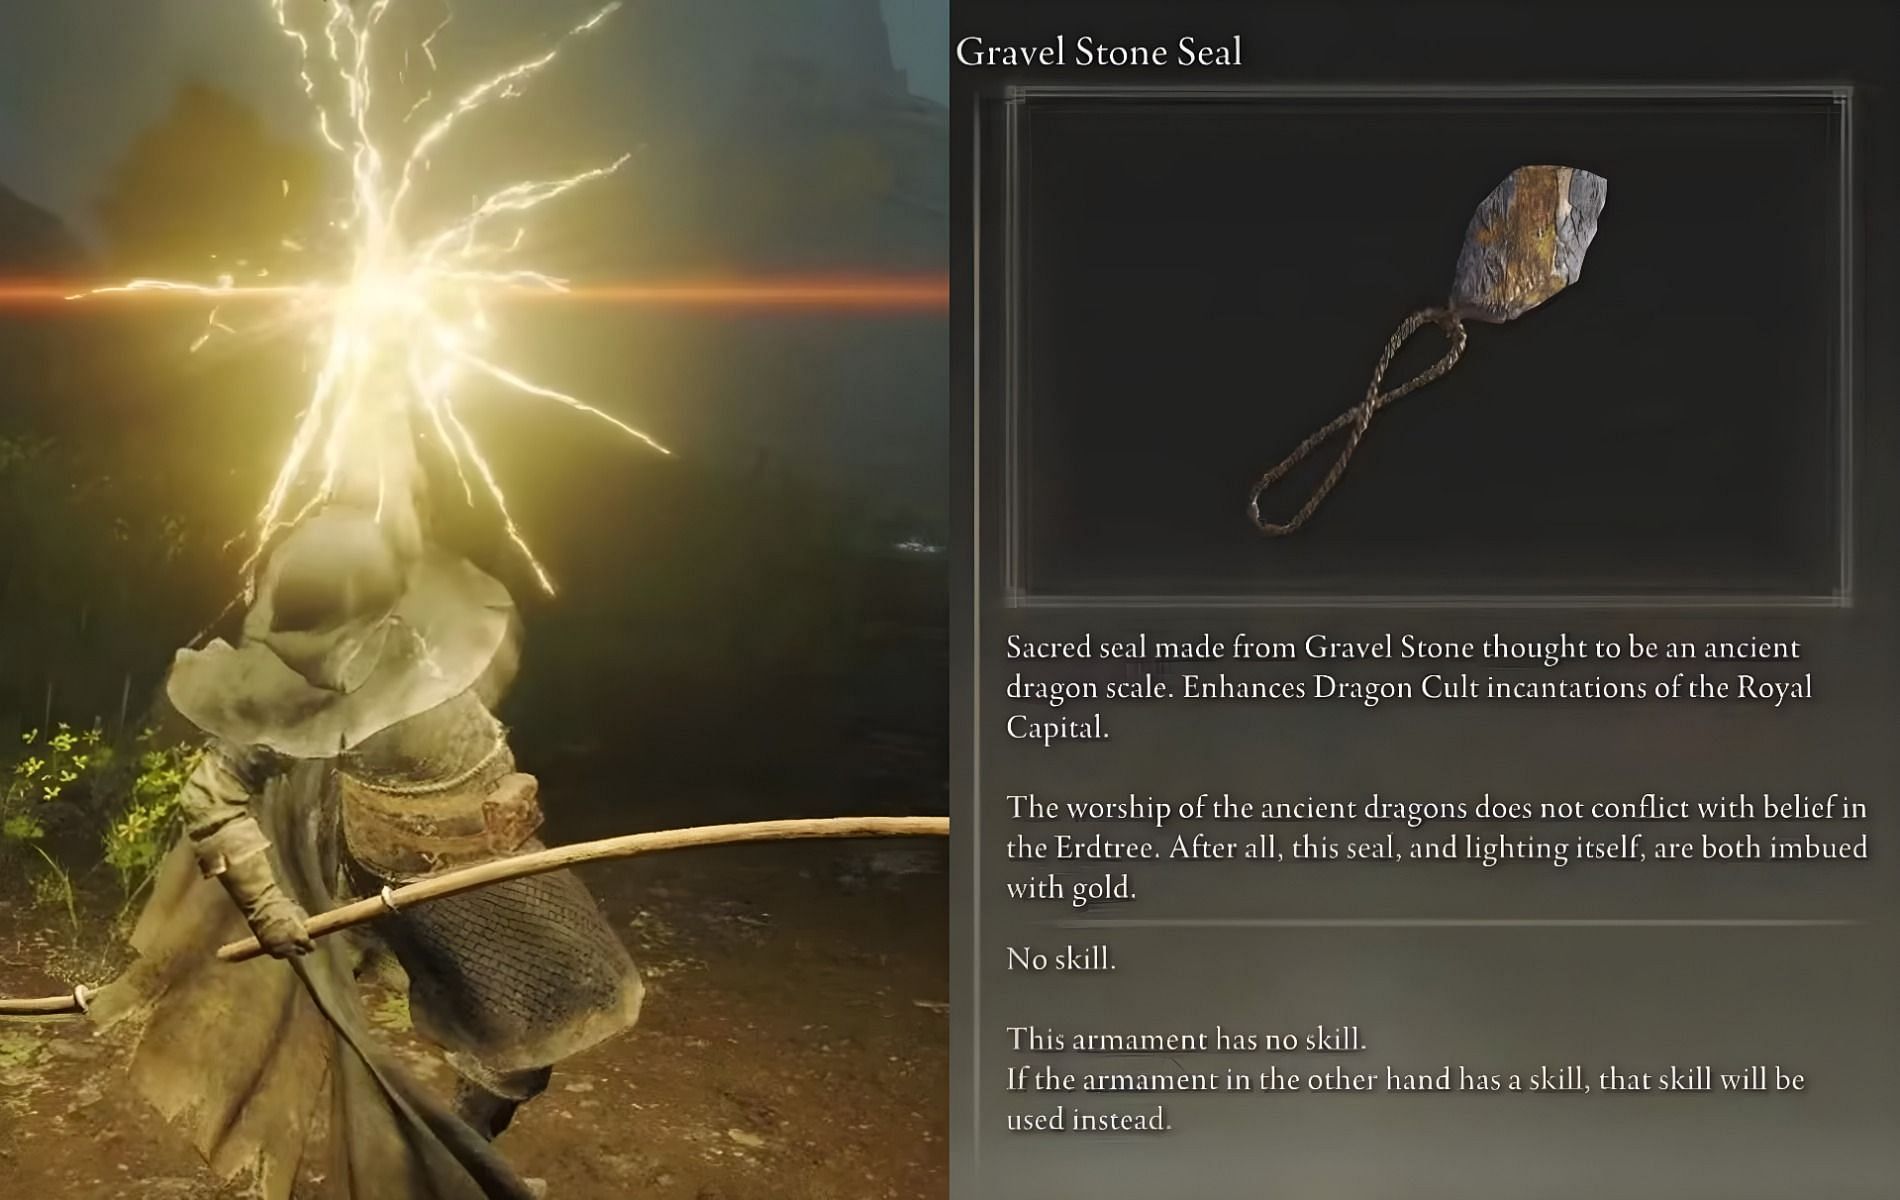 How to obtain Gravel Stone Seal that buffs Dragon Cult Incantations in